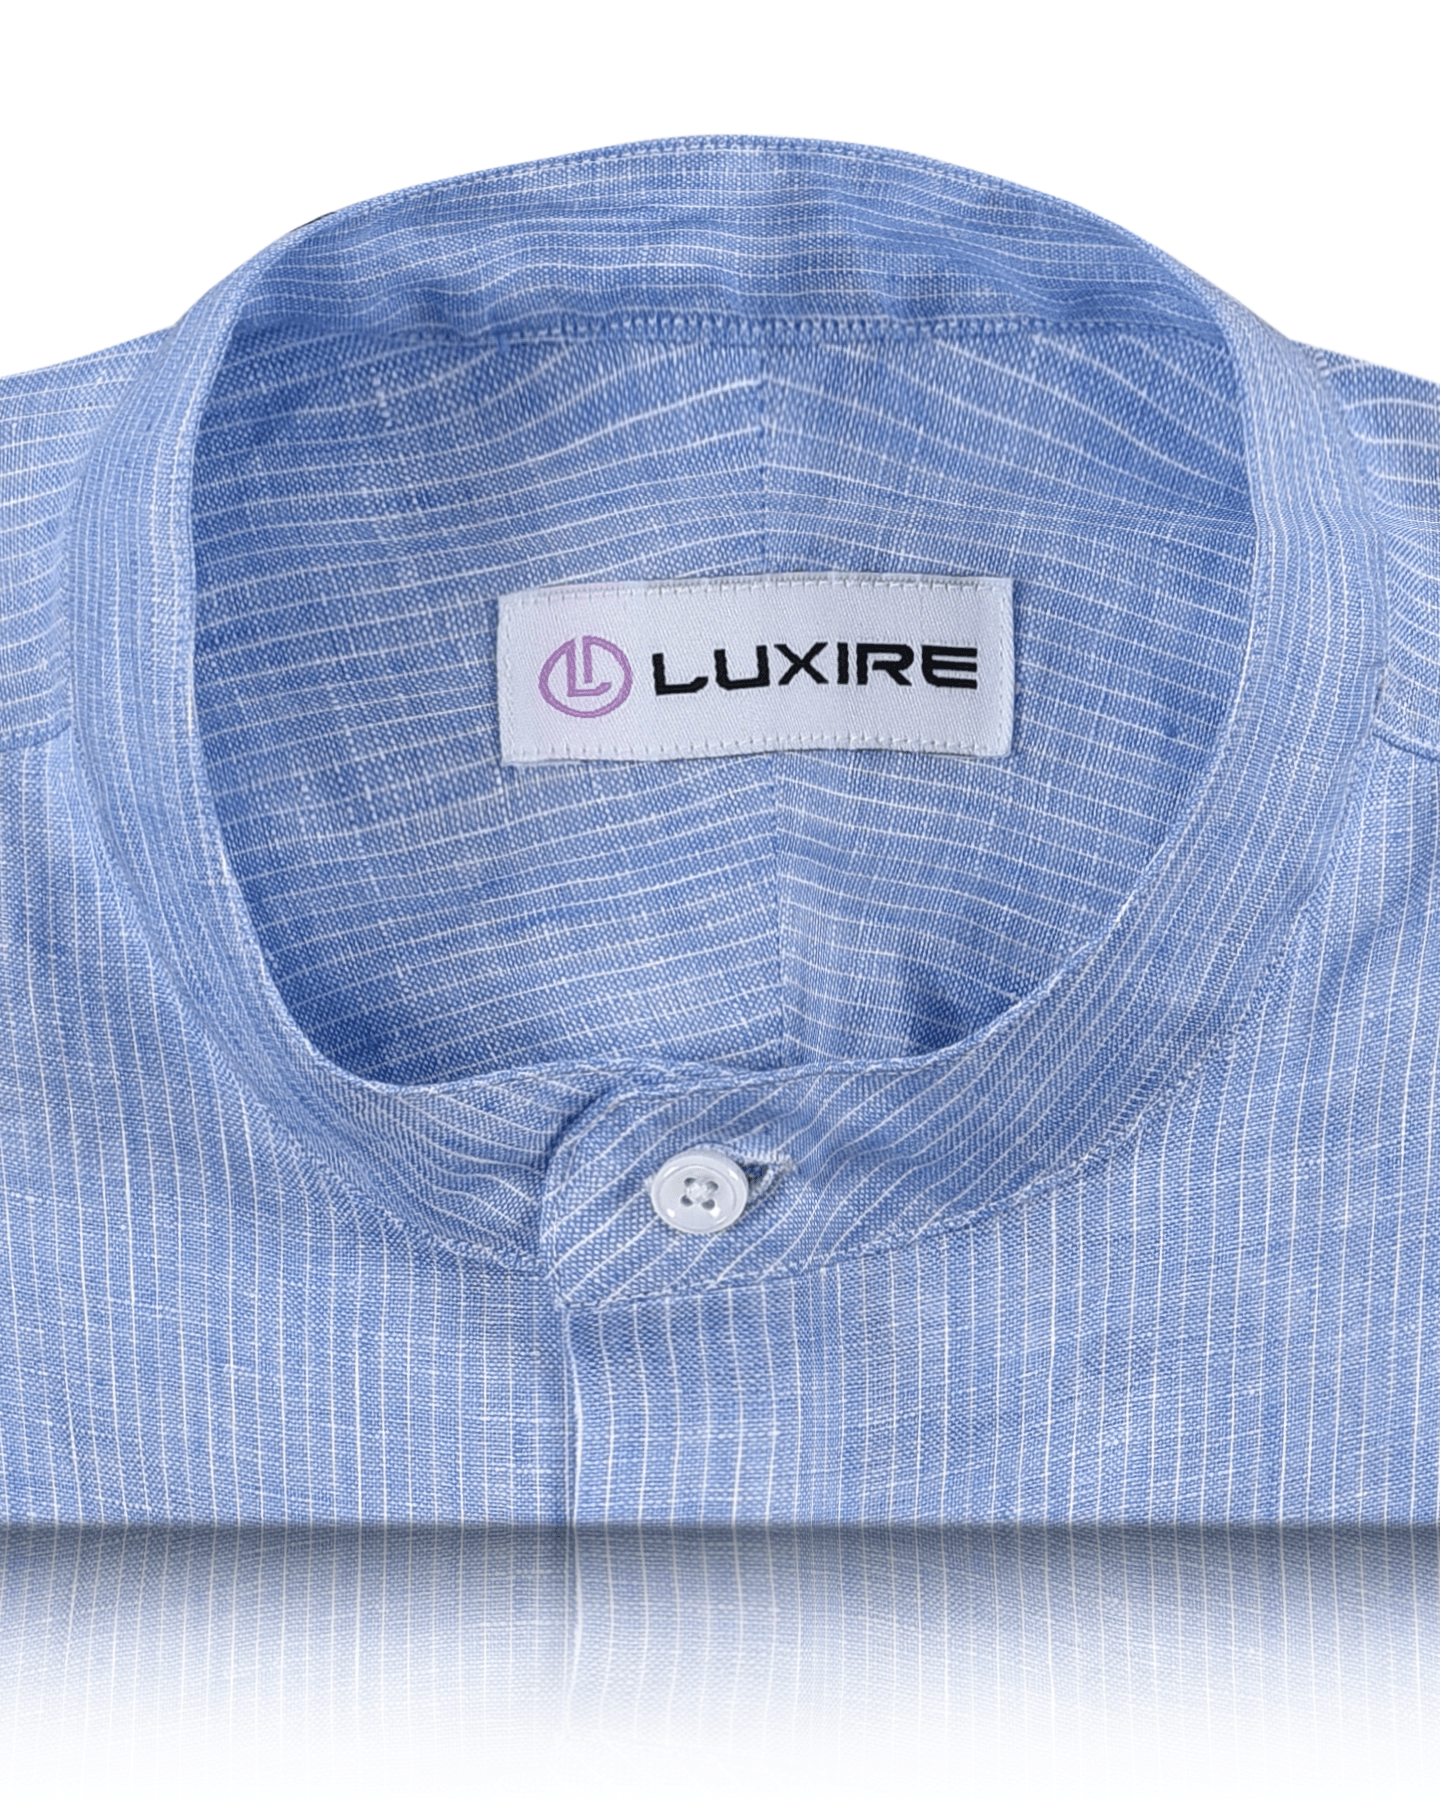 Collar of the custom linen shirt for men in white and blue stripes by Luxire Clothing